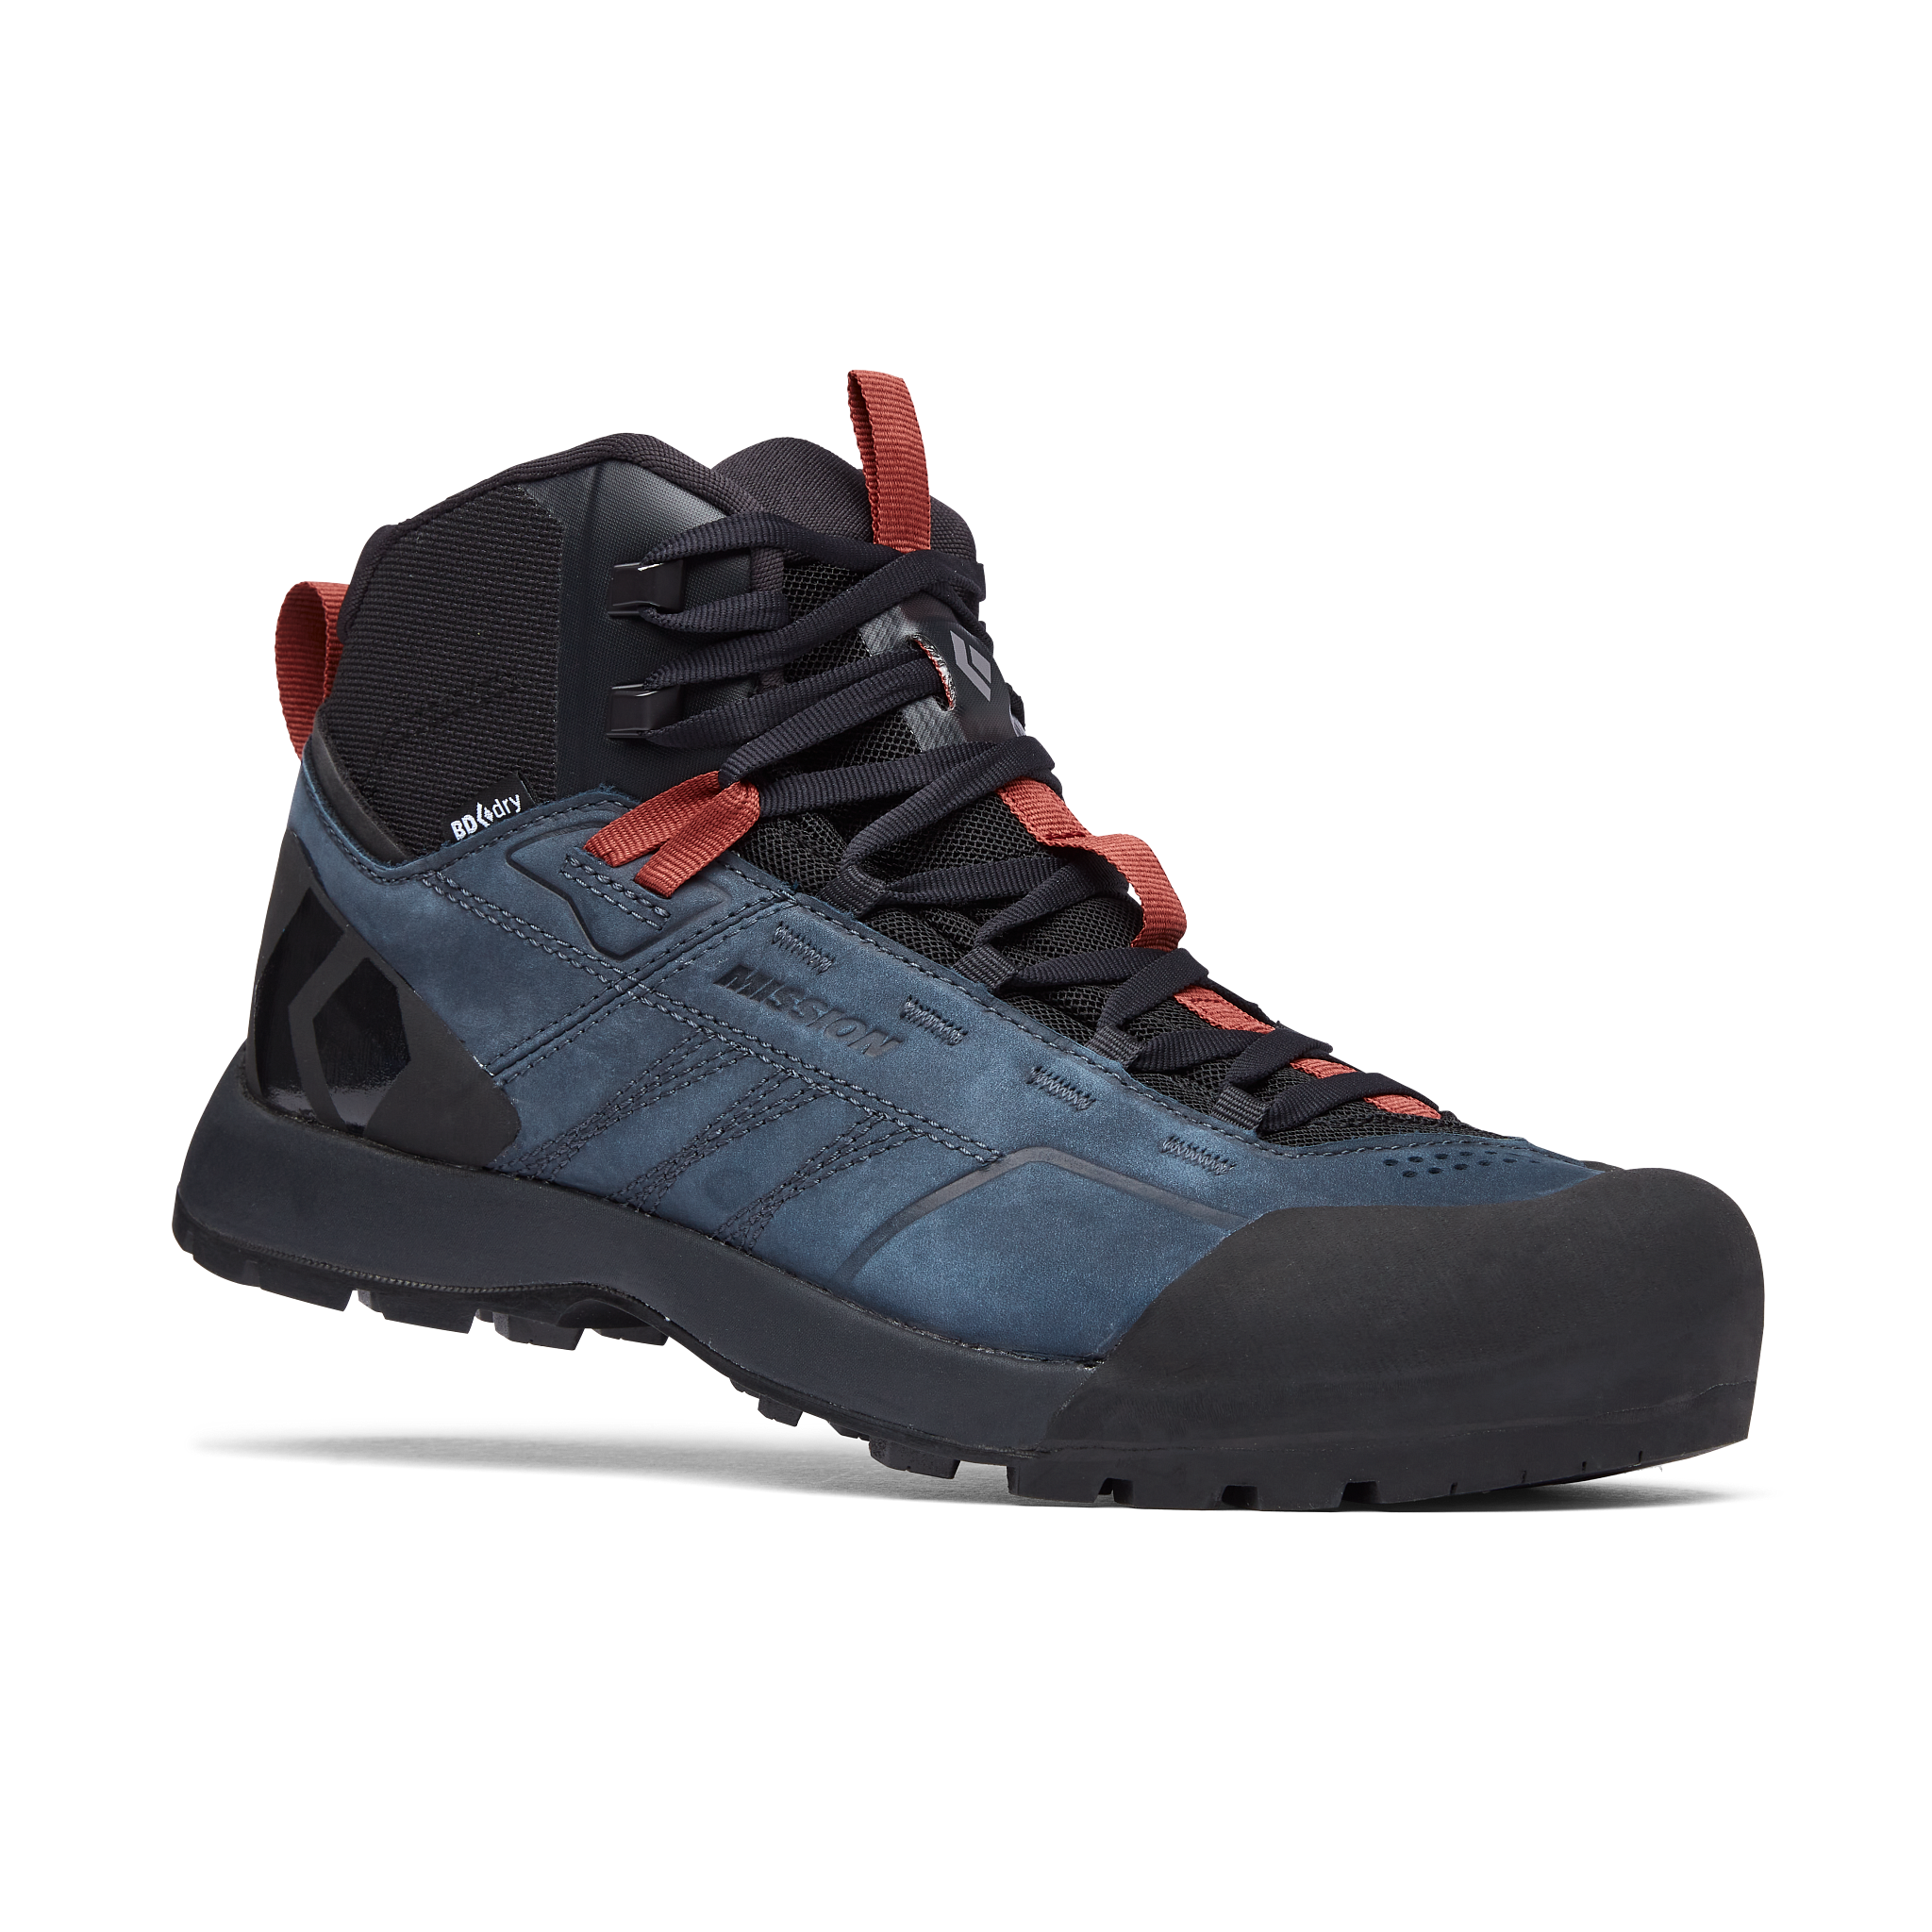 Black Diamond Equipment Men's Mission Leather Mid Waterproof Approach Shoes 2nds US 12 Eclipse/Red Rock